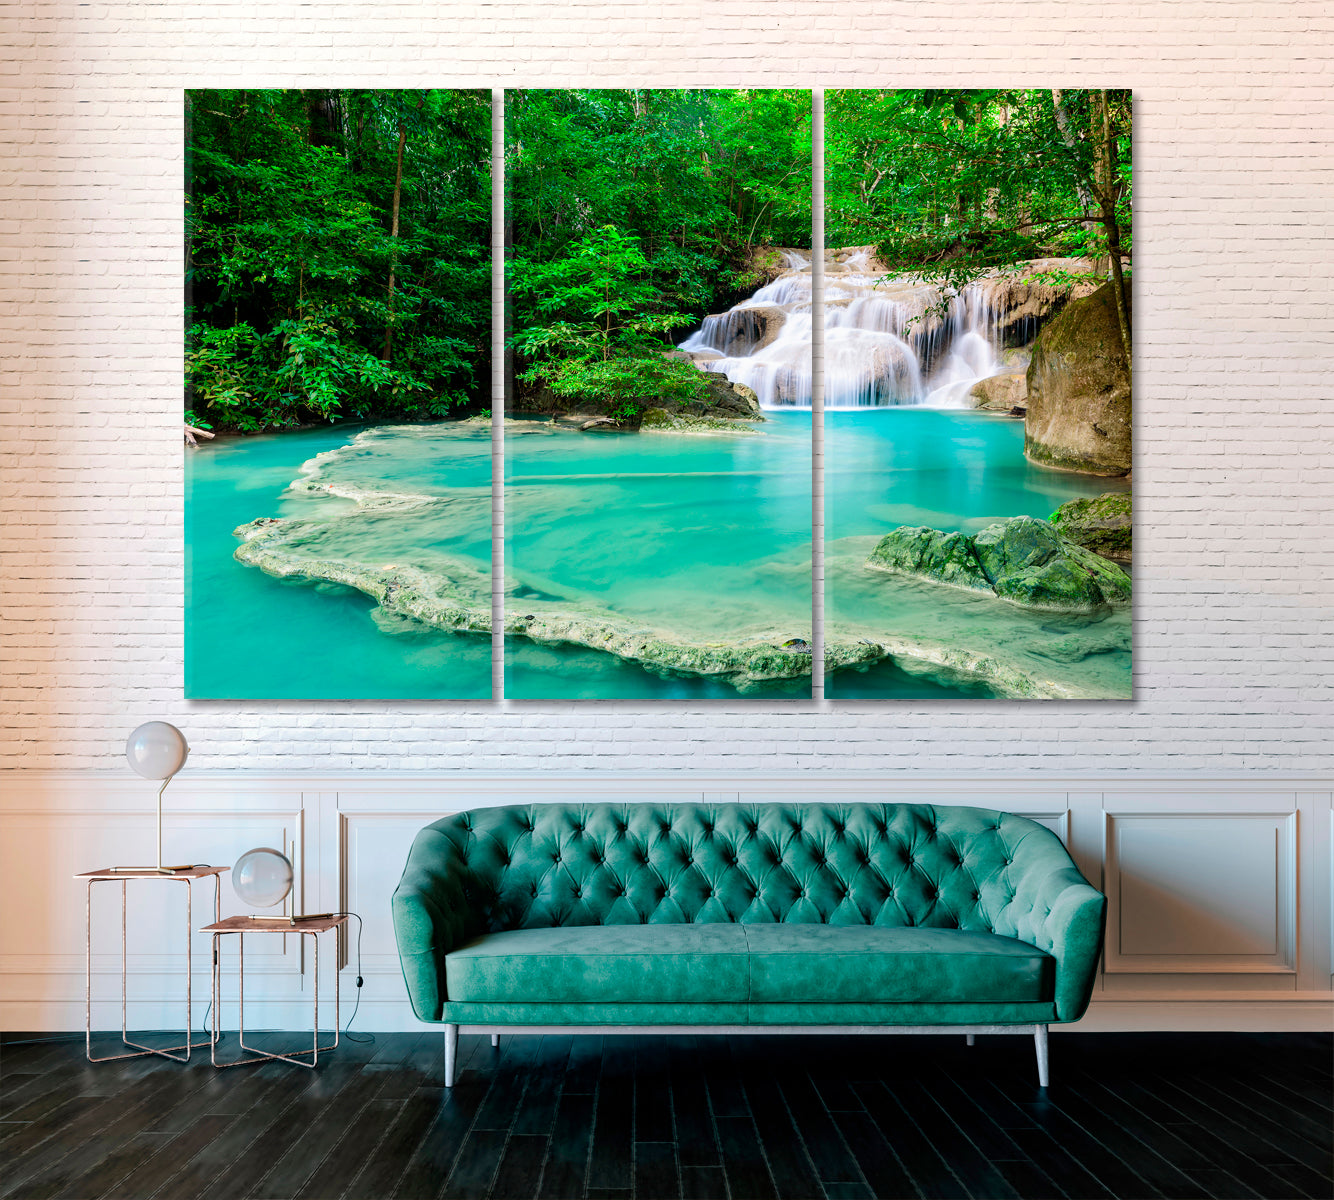 Waterfall in Tropical forest at Erawan National Park Thailand Canvas Print ArtLexy 3 Panels 36"x24" inches 